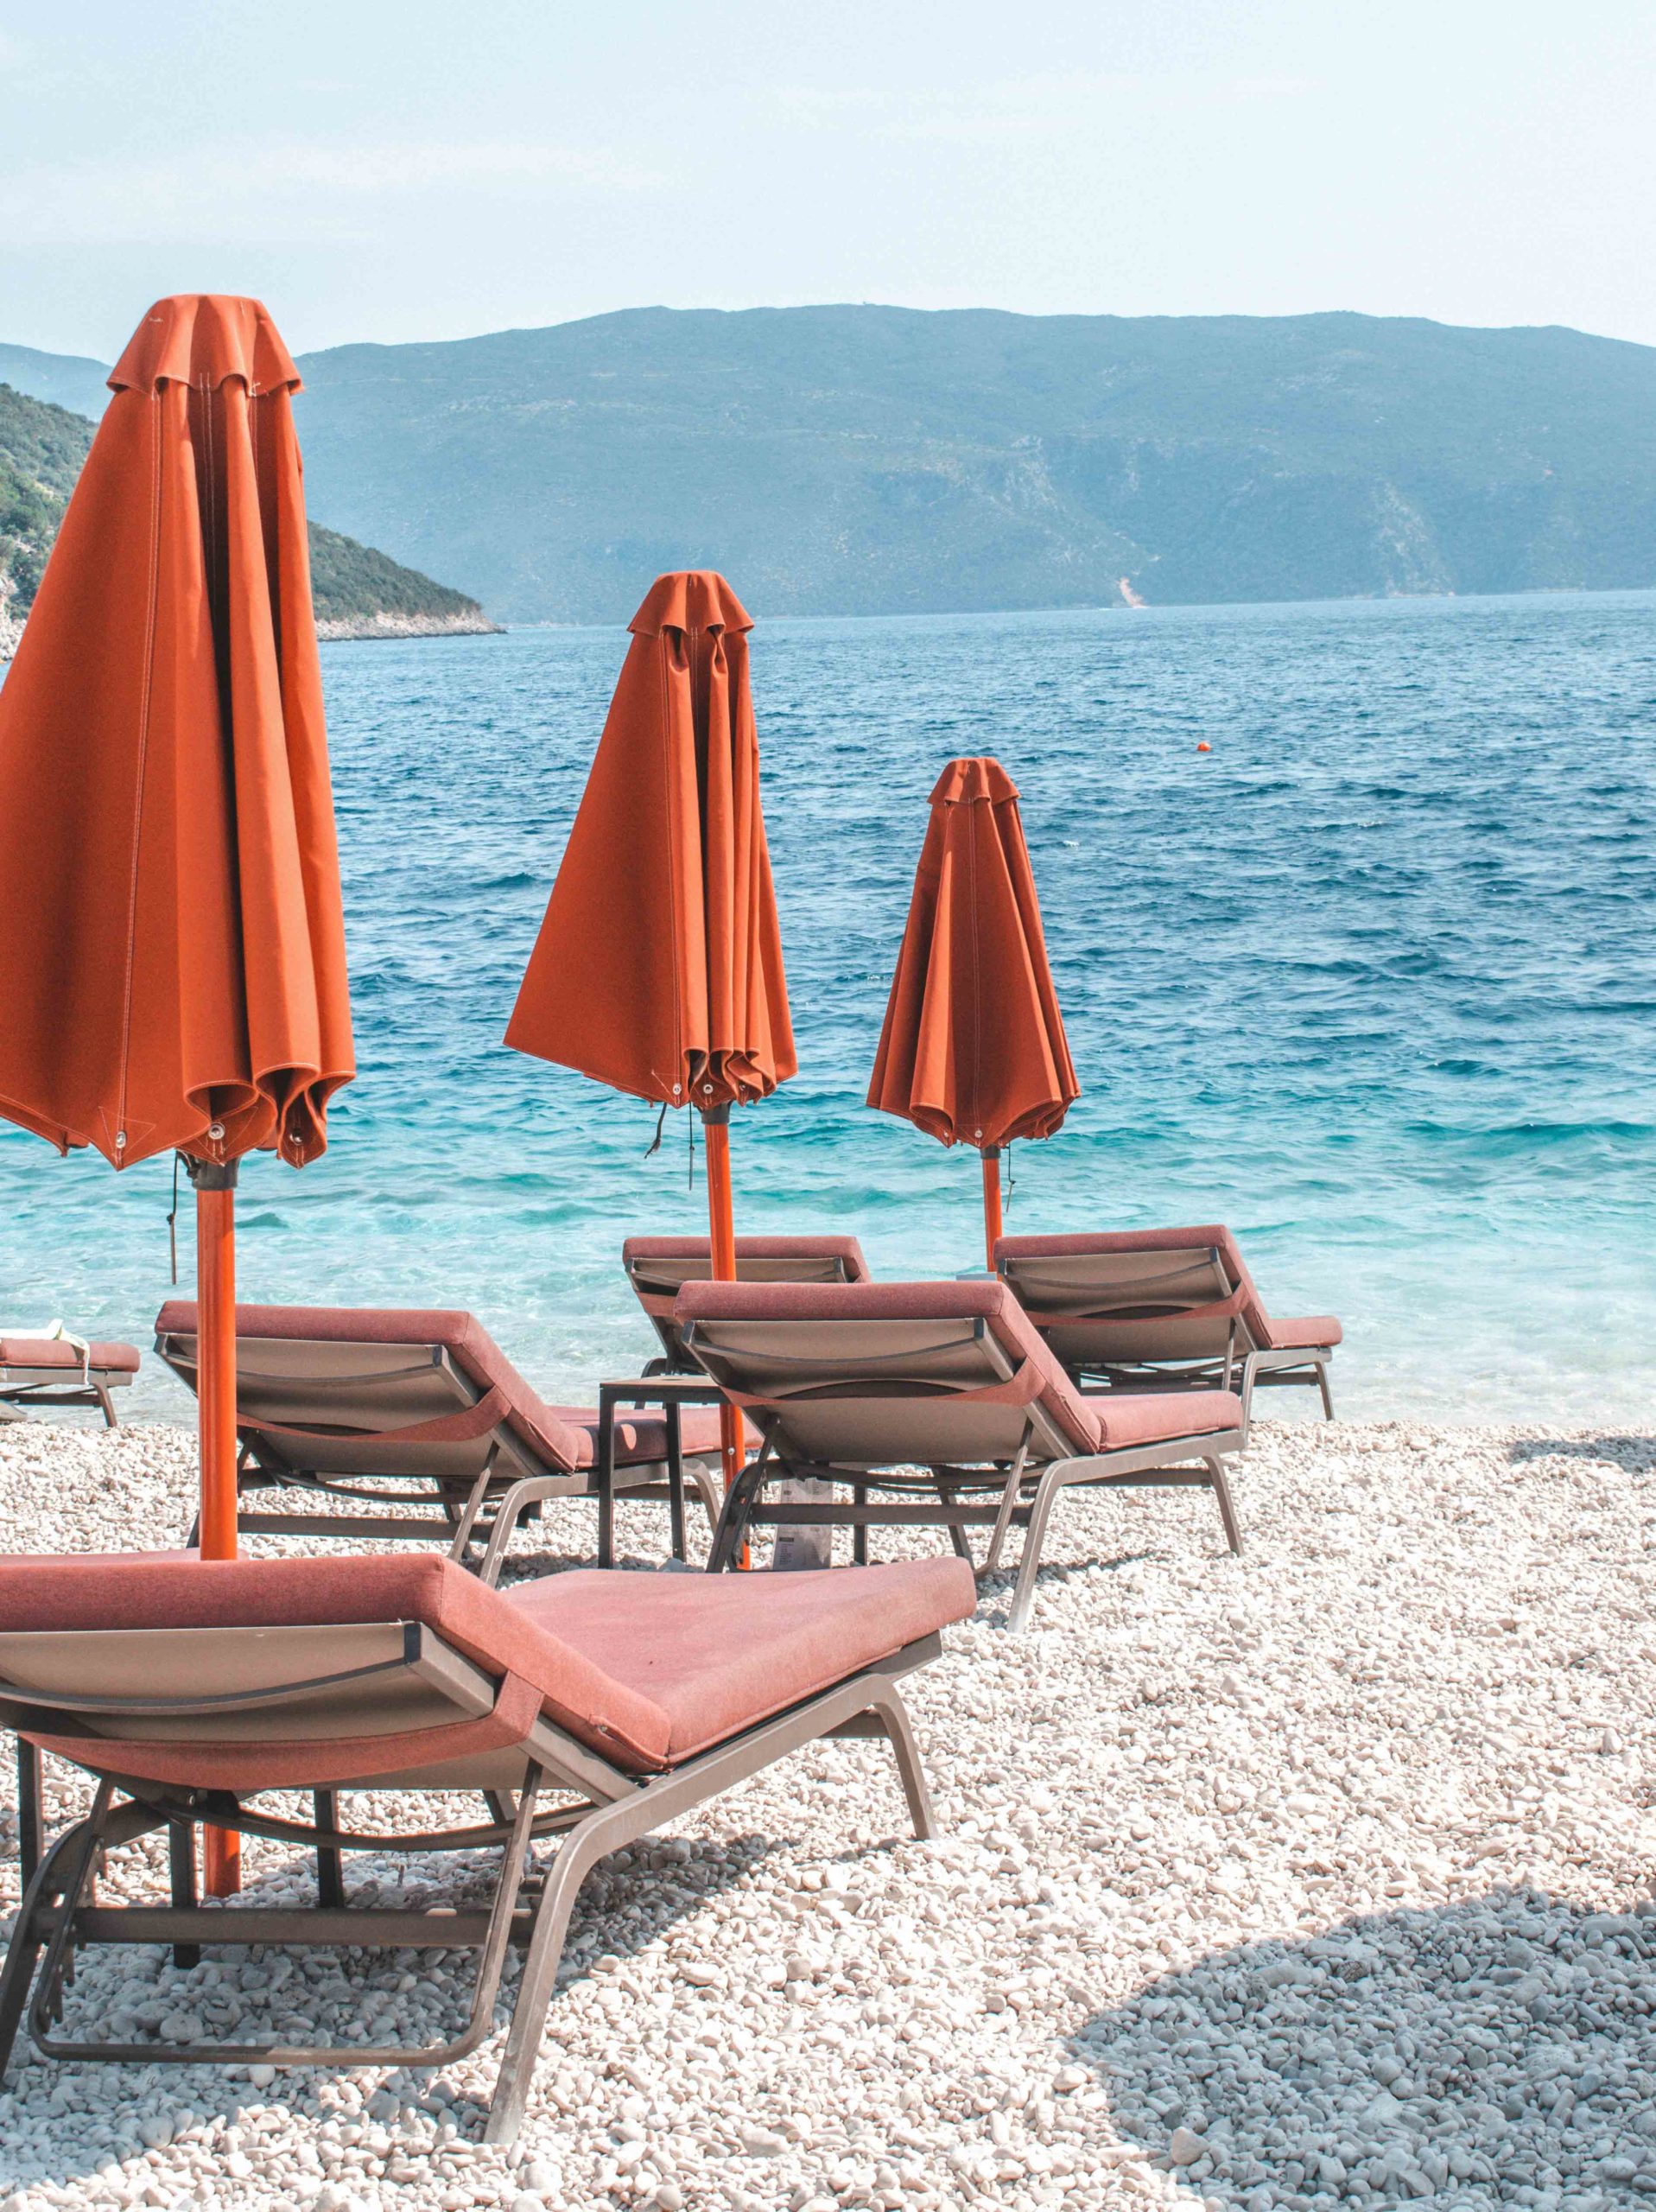 What to do in Kefalonia Greece